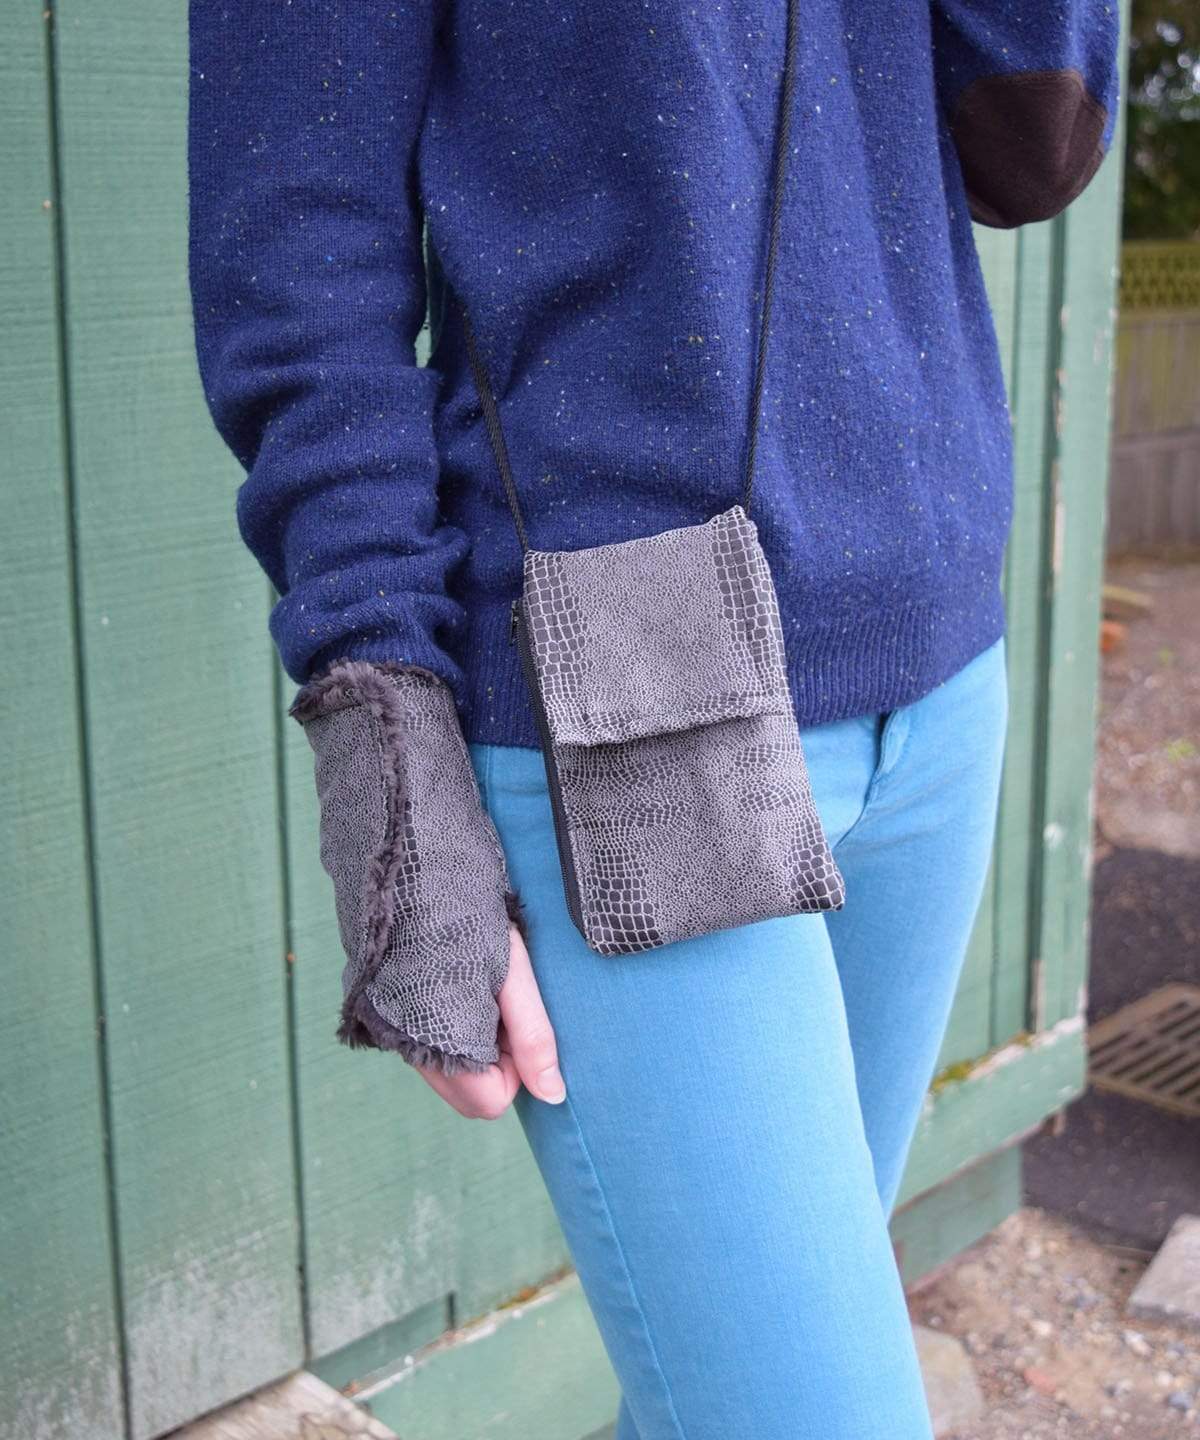 Hand Wrap Gloves with matching Cell Phone Case with Crossbody Cord | Outback Brown Vegan Leather Fabric | Handmade in the USA by Pandemonium Seattle